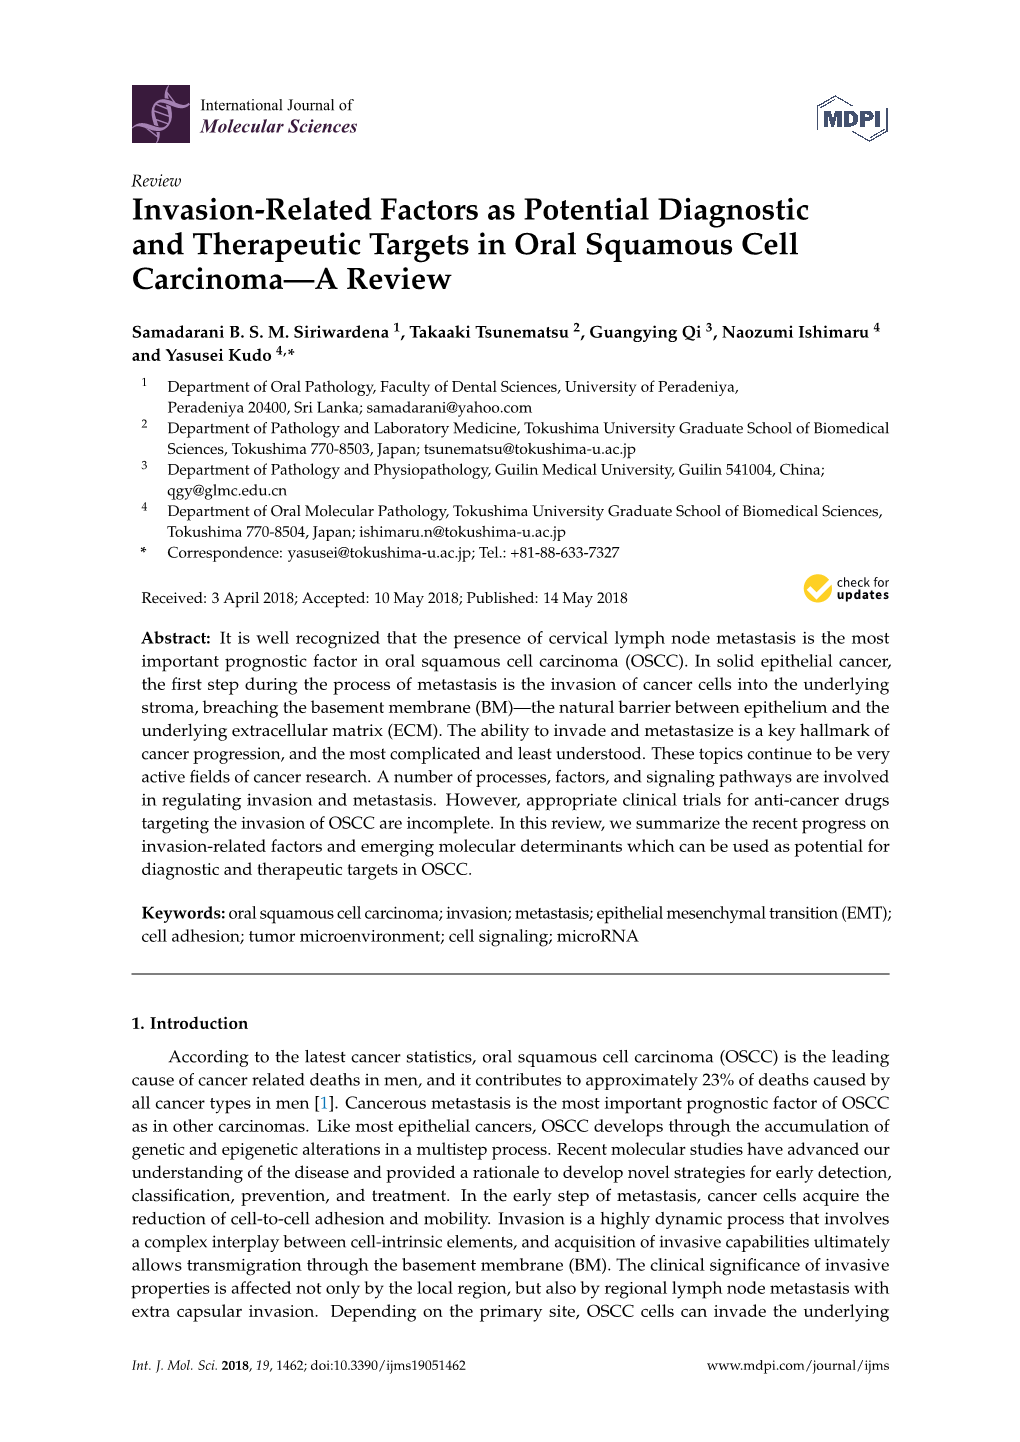 Invasion-Related Factors As Potential Diagnostic and Therapeutic Targets in Oral Squamous Cell Carcinoma—A Review